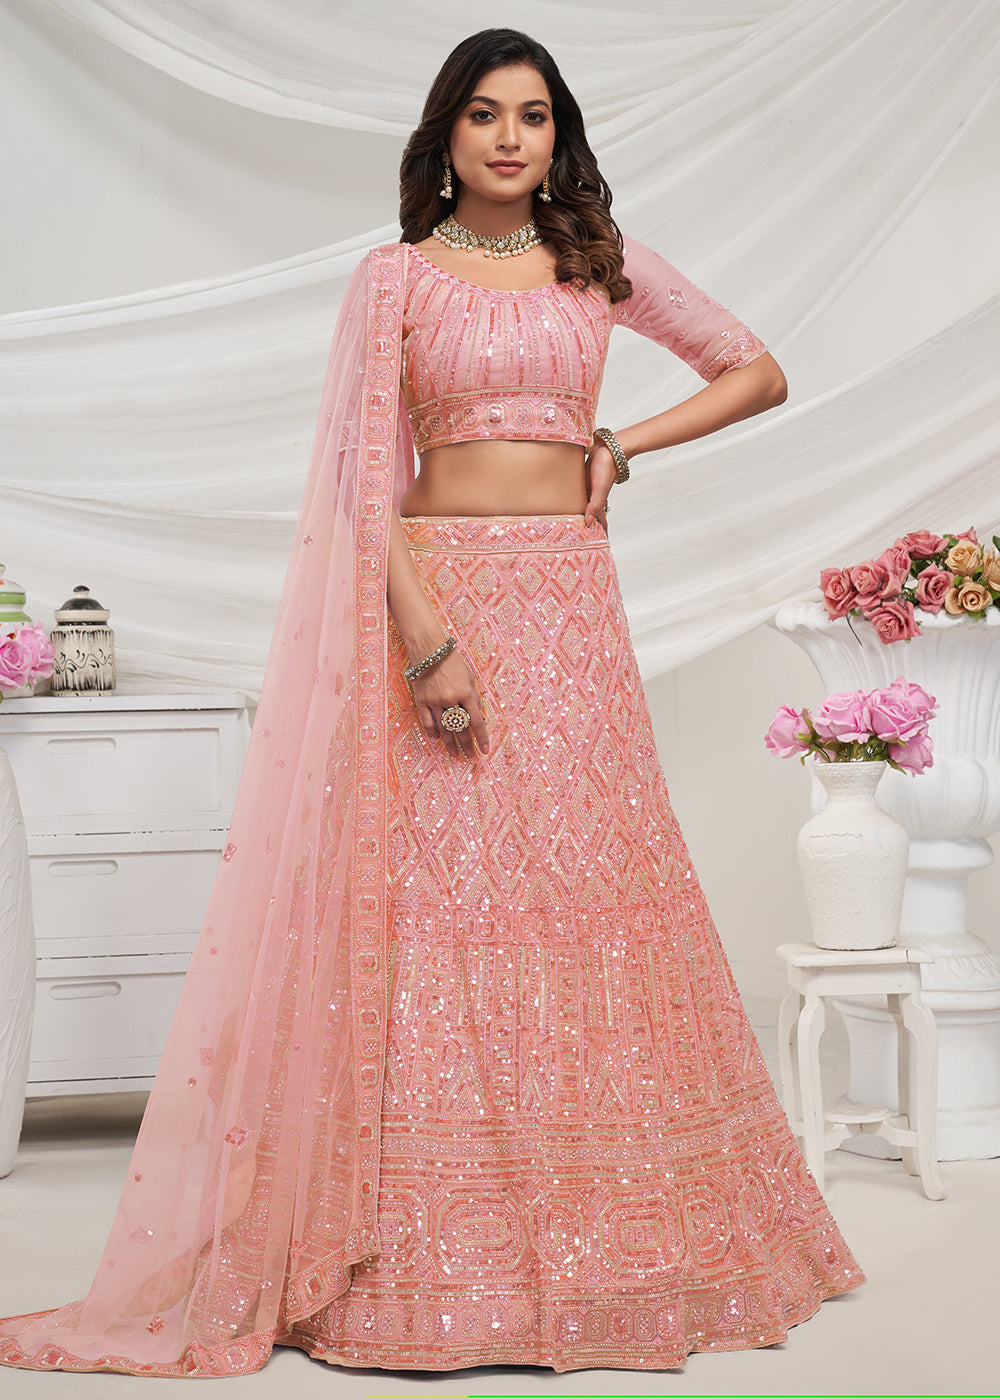 Buy Now Pearled Peach Heavy Embroidered Bridal Lehenga Choli Online in USA, UK, Canada & Worldwide at Empress Clothing.